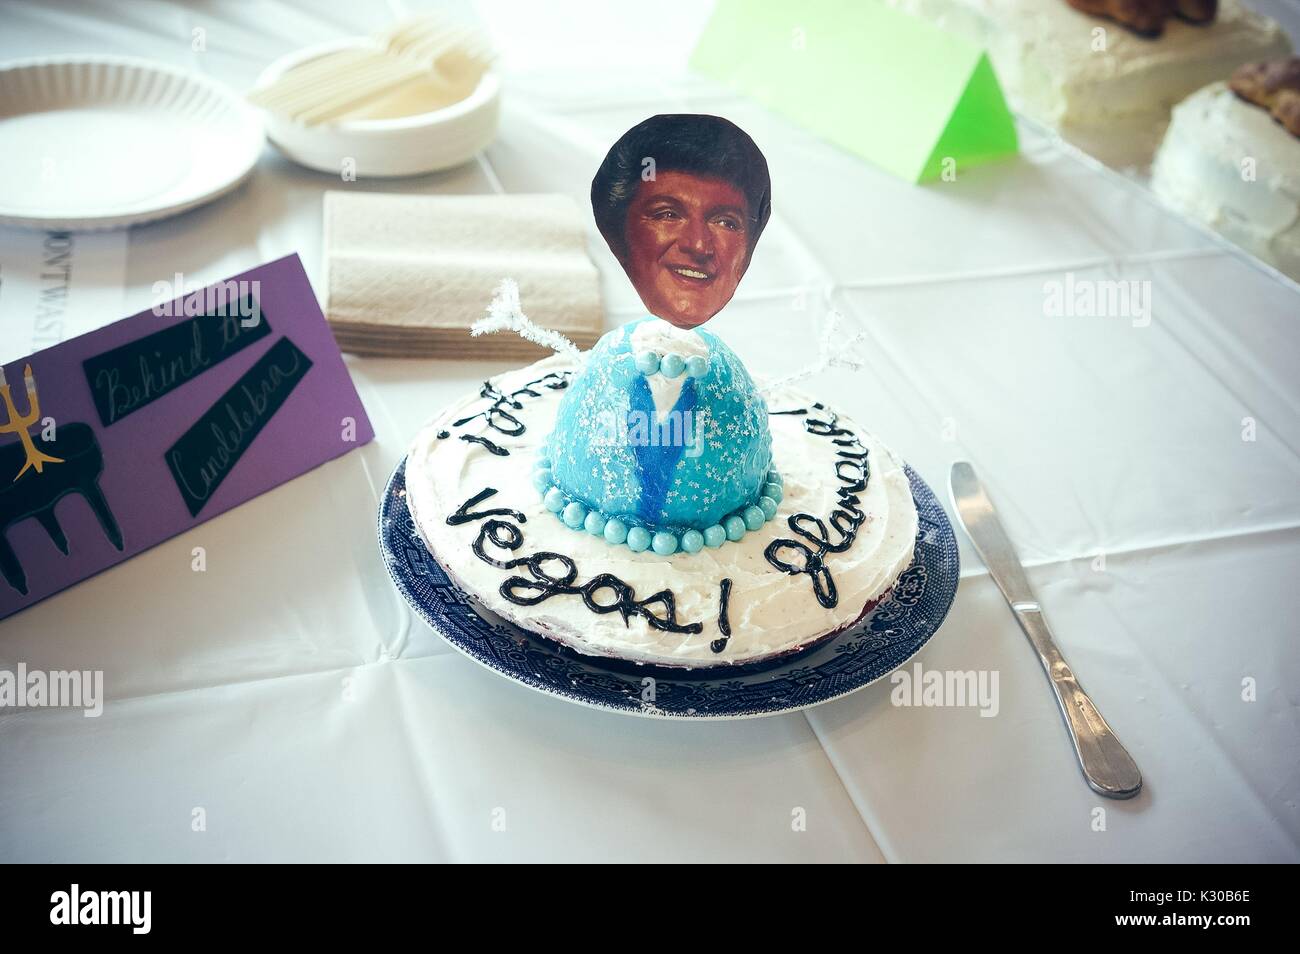 Submission for Read It and Eat It contest, and edible book festival at Milton S Eisenhower Library, Johns Hopkins University, showing a cake with a cut out face of Liberace atop a turquoise body form, with frosted text written all around, for the theme 'Behind the Candelabra, ' Baltimore, Maryland, April, 2016. Courtesy Eric Chen. Stock Photo